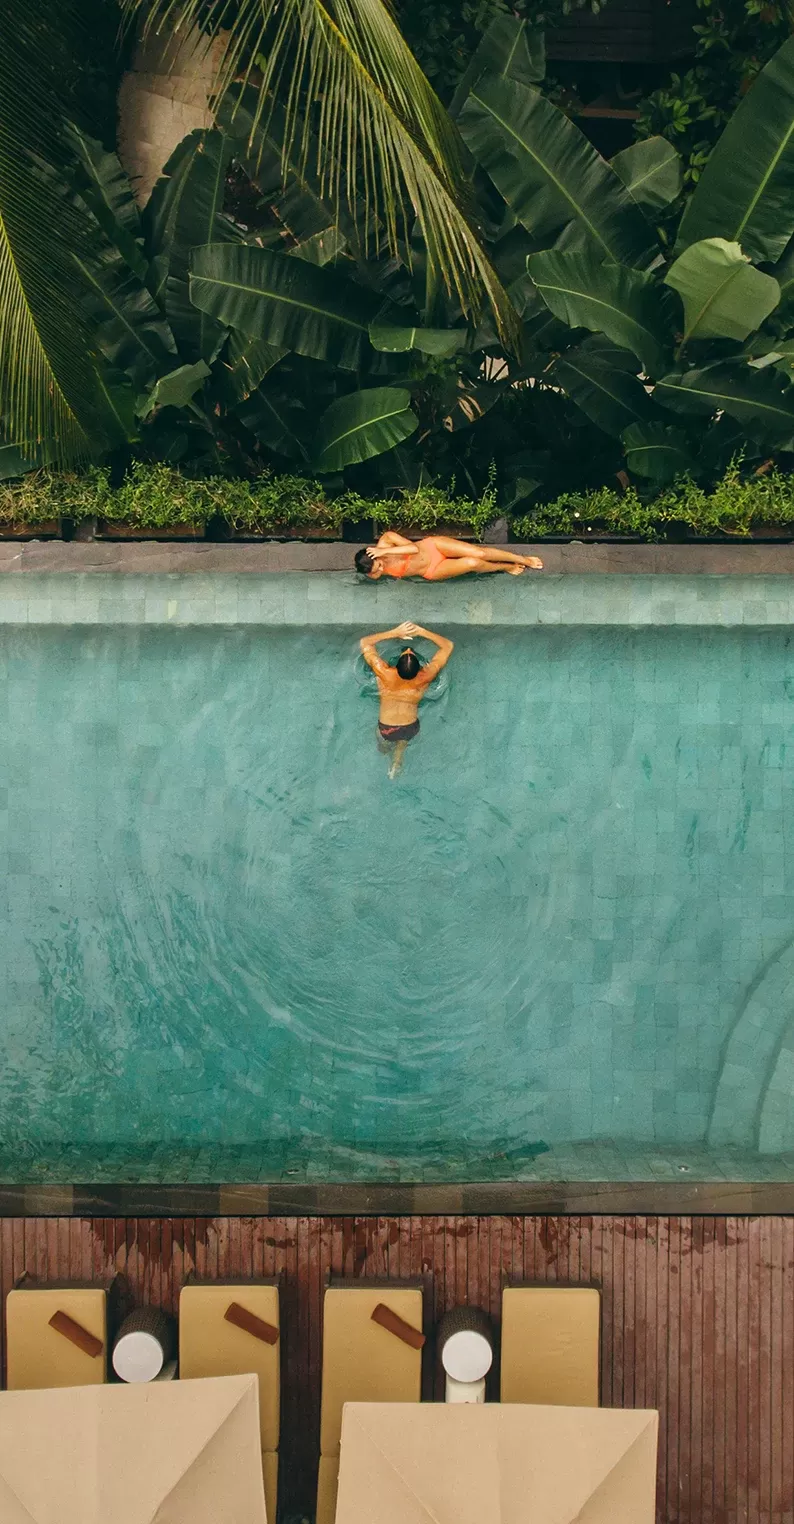 Birdseye view of outdoor swimming pool and loungers, amongst huge green forest trees with a women bathing on the edge of the pool and a man inside of the pool.